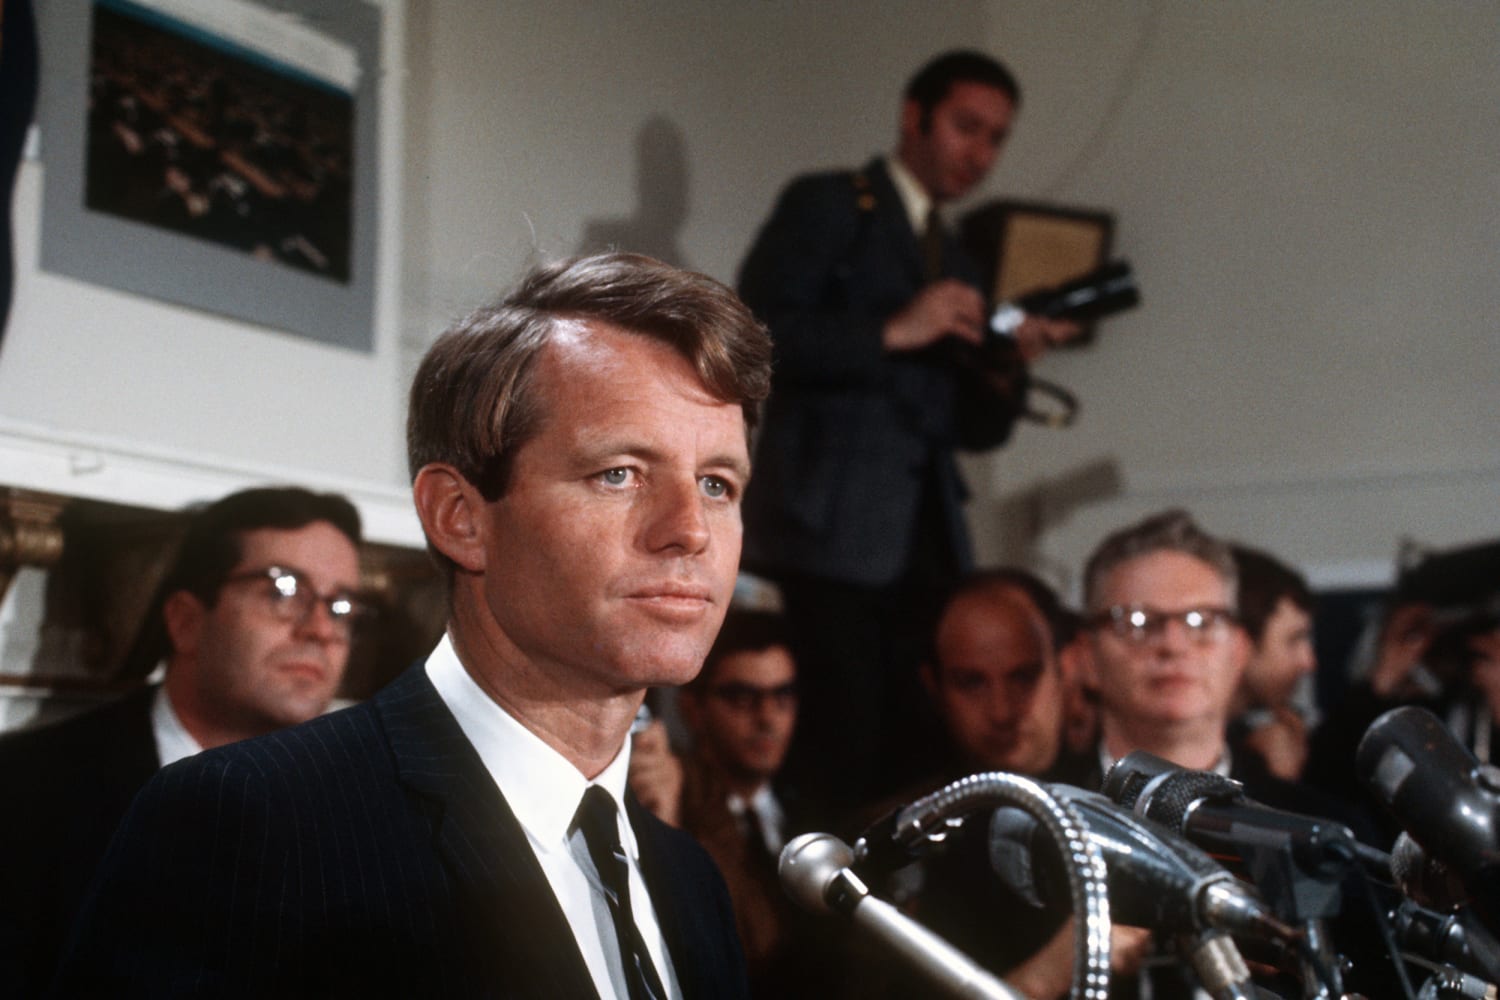 The very strong case against freeing RFK’s killer